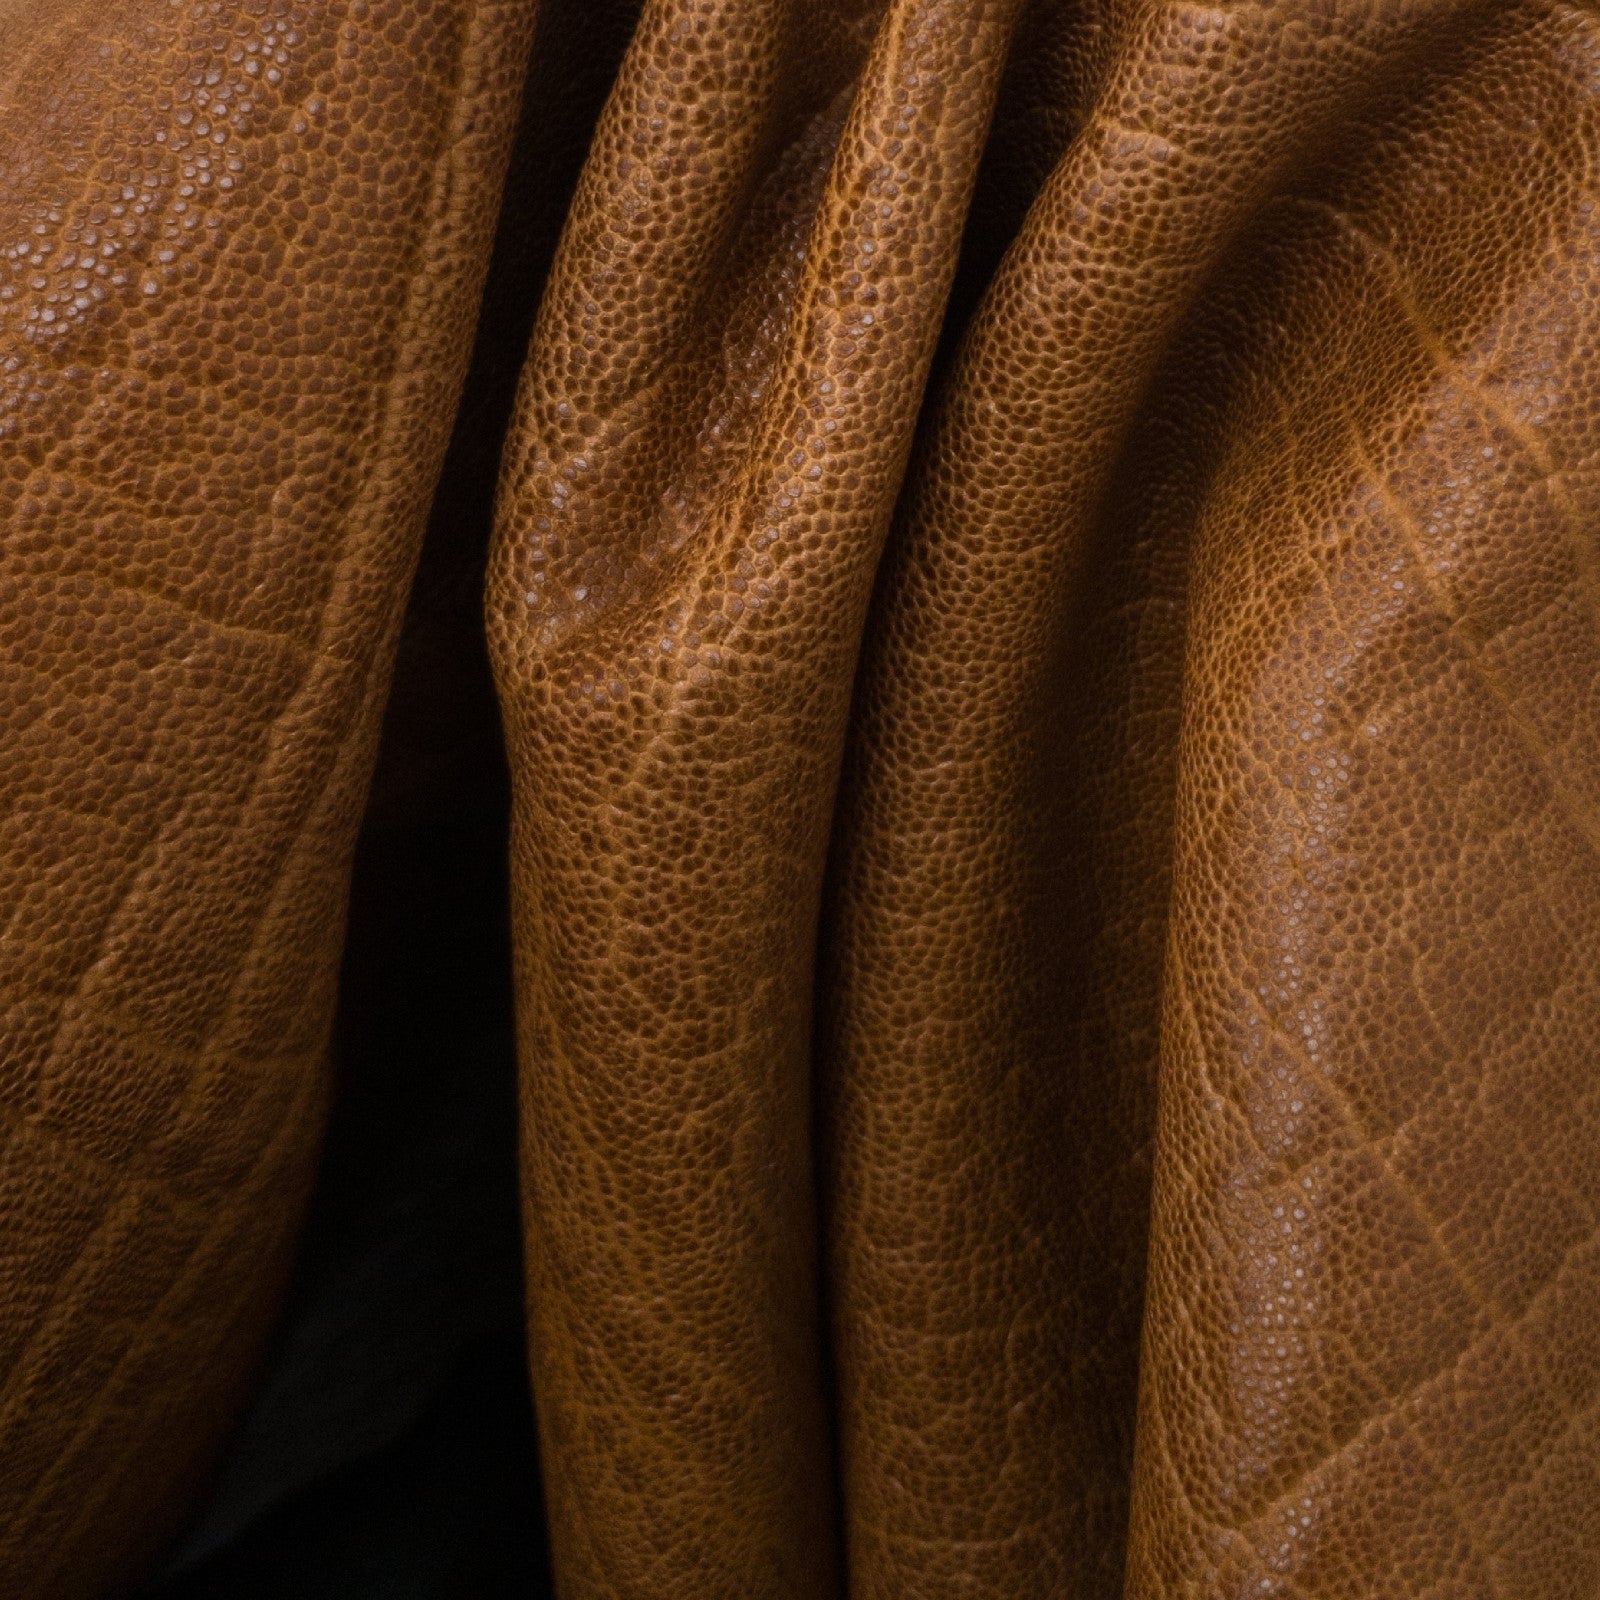 Scrubland Brown, 4-5 oz, 2-4 Sq Ft, Genuine Elephant Hides,  | The Leather Guy